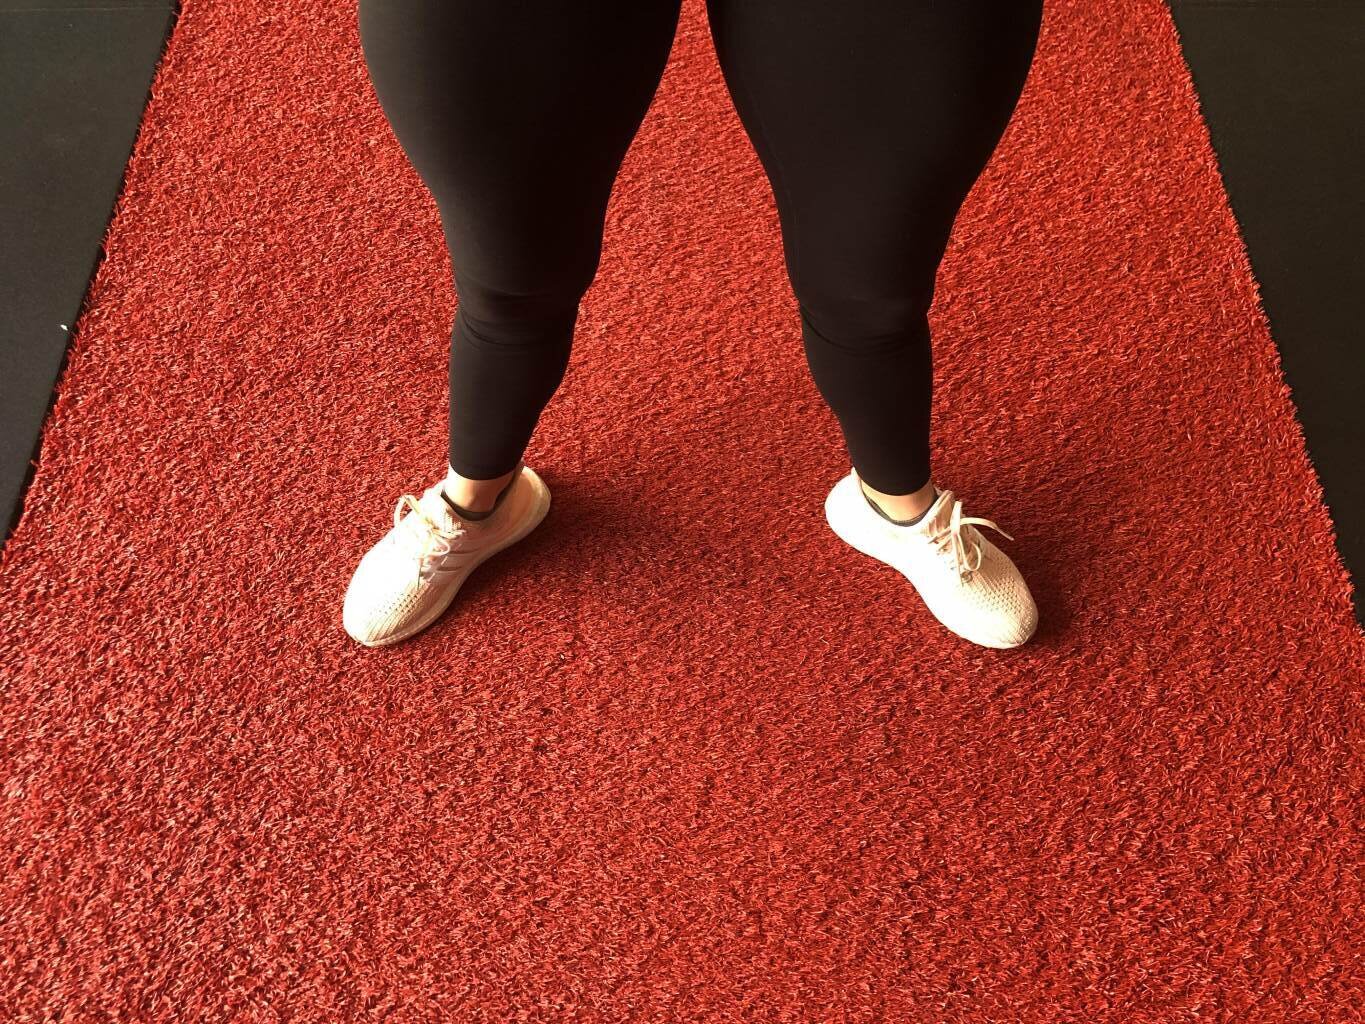 Flare the toes to activate the glutes more while squatting